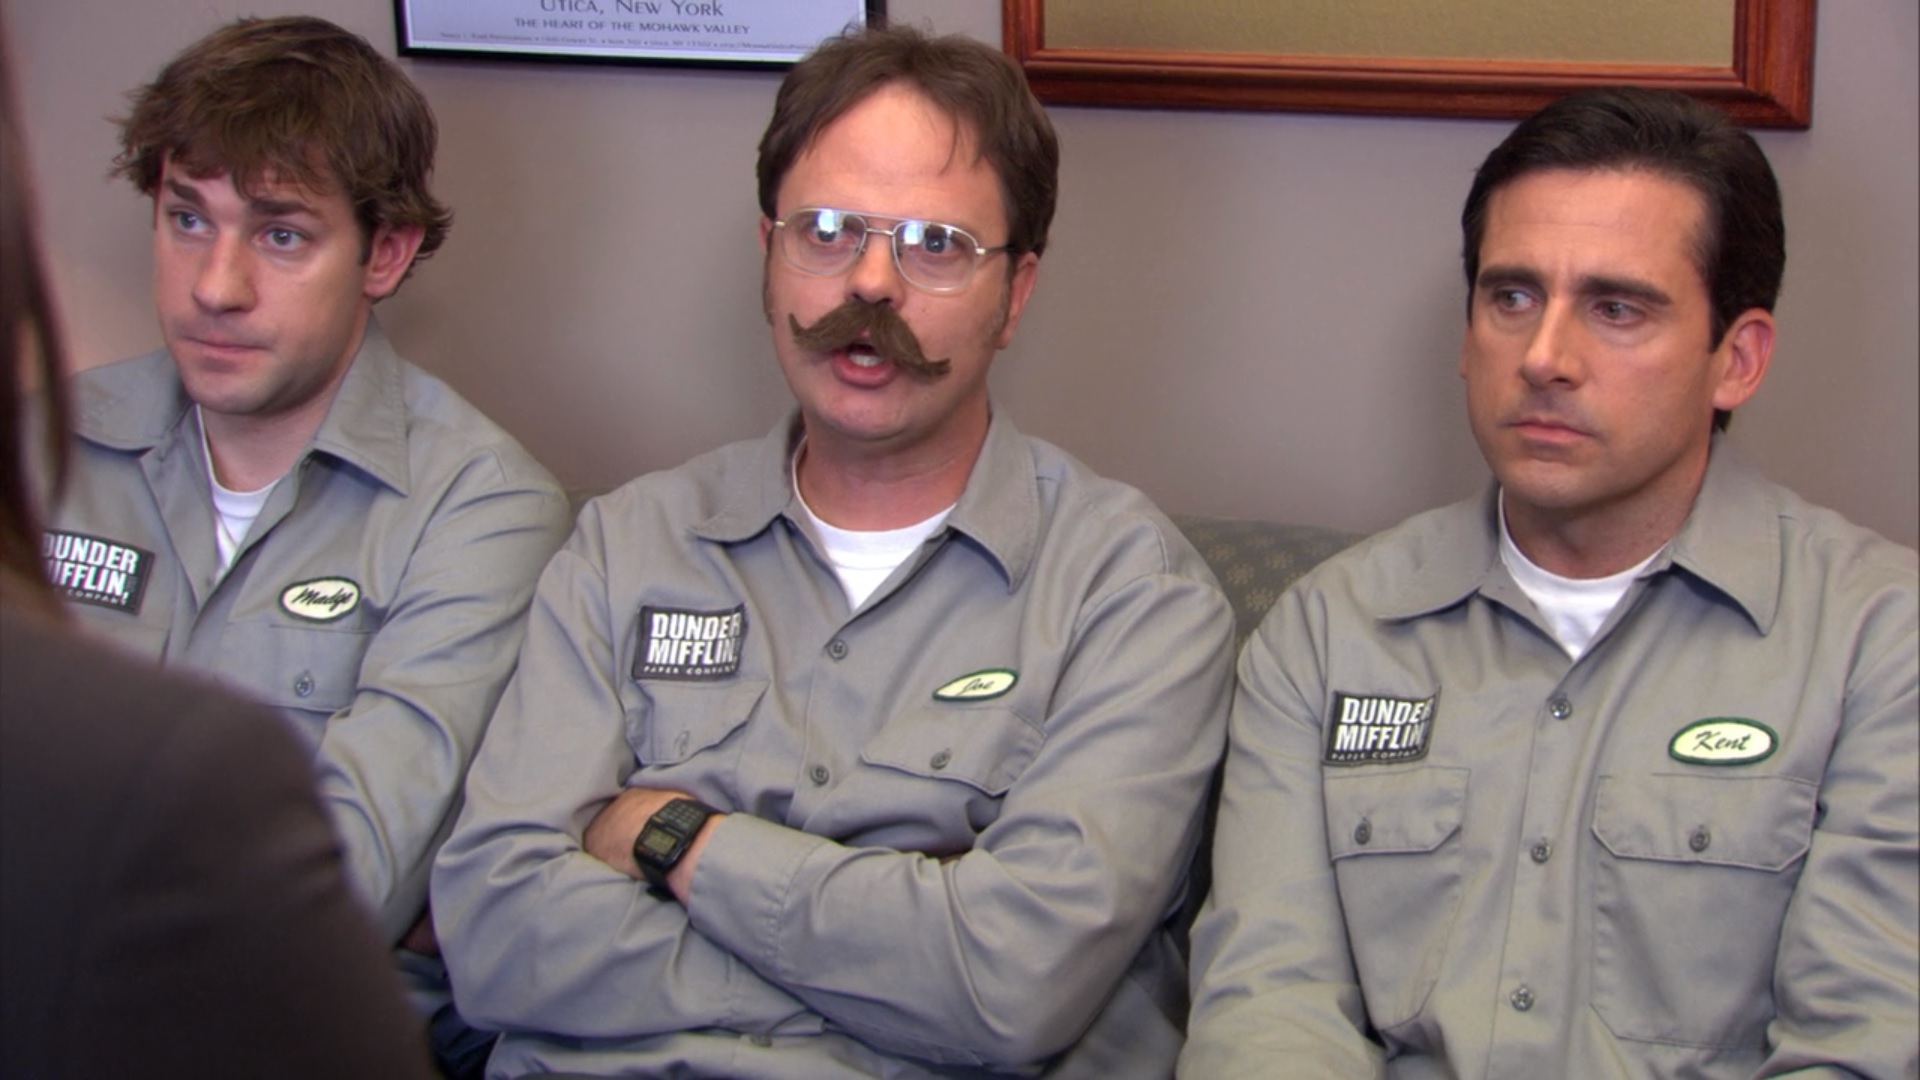 Jim, Dwight, and Michael sitting in Karen's office.